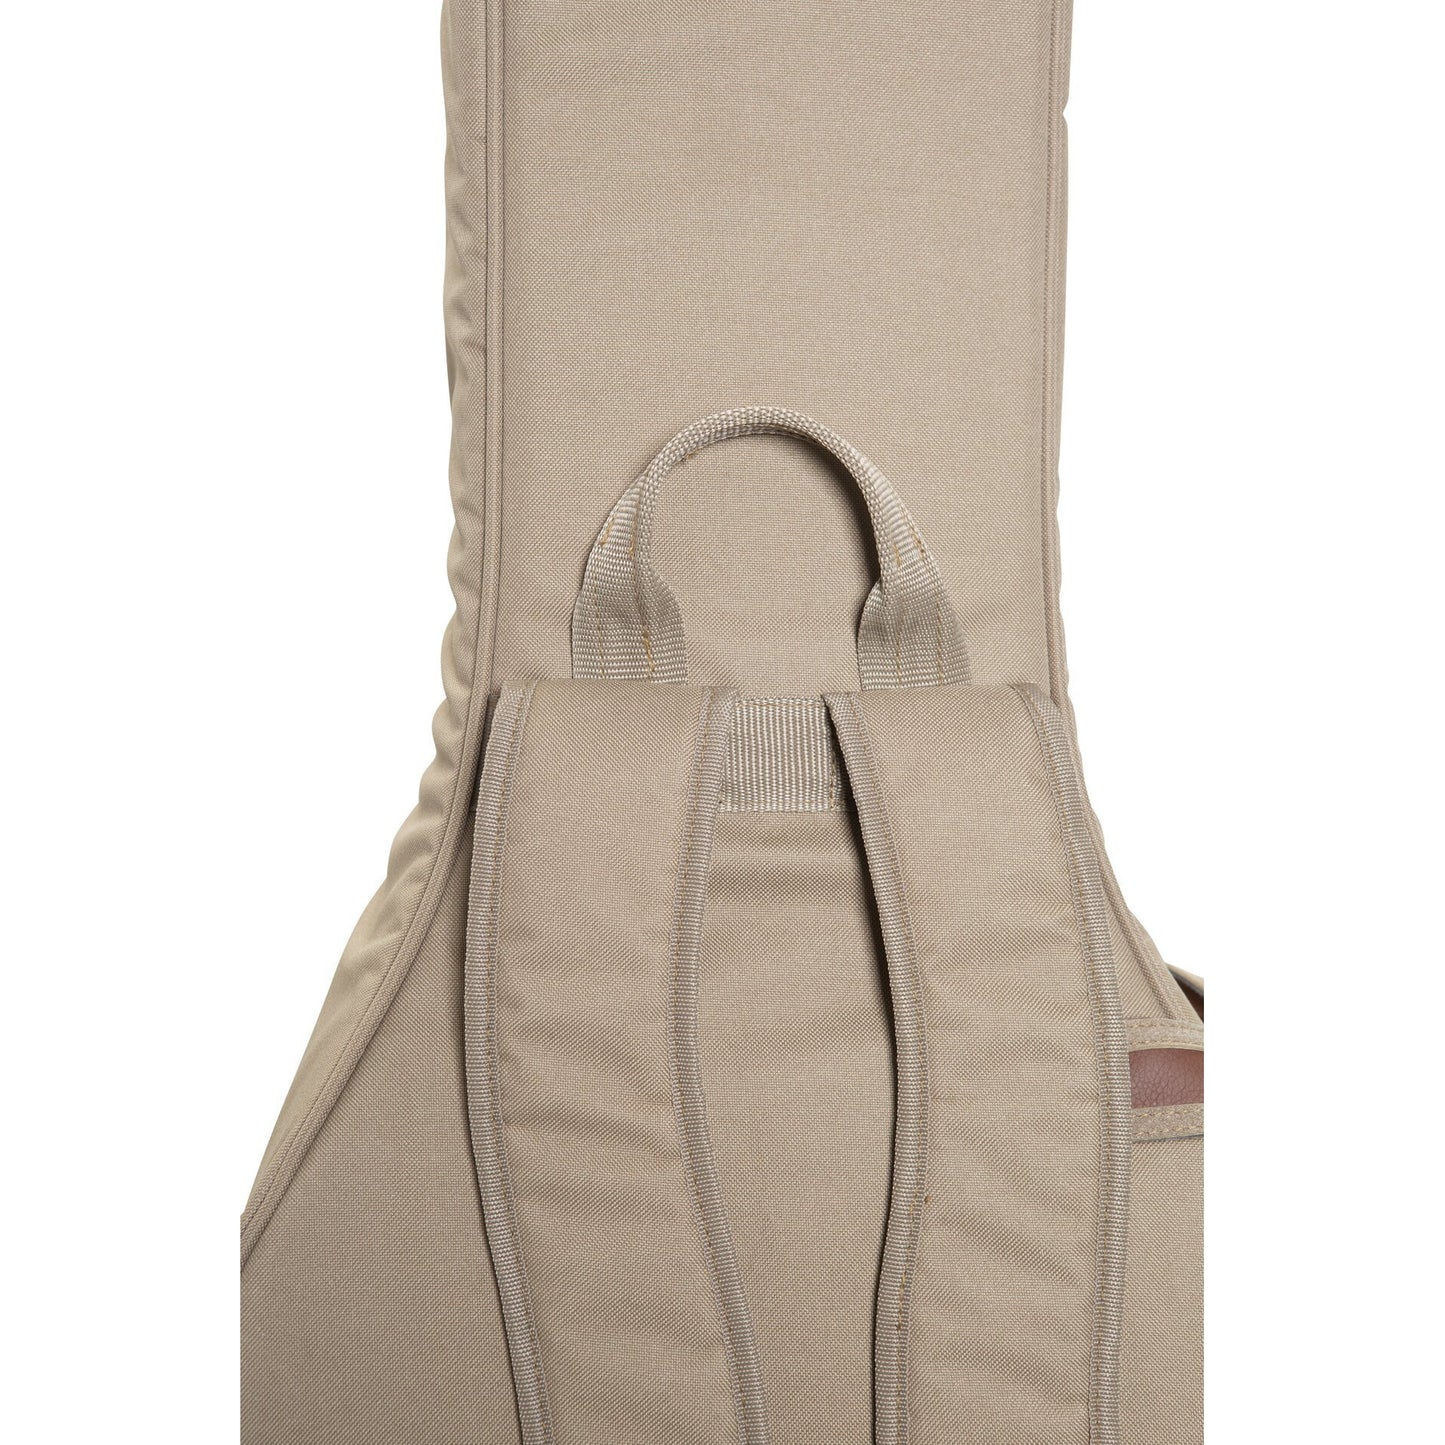 Levy's 200-Series Deluxe Electric Bass Gig Bag, Tan